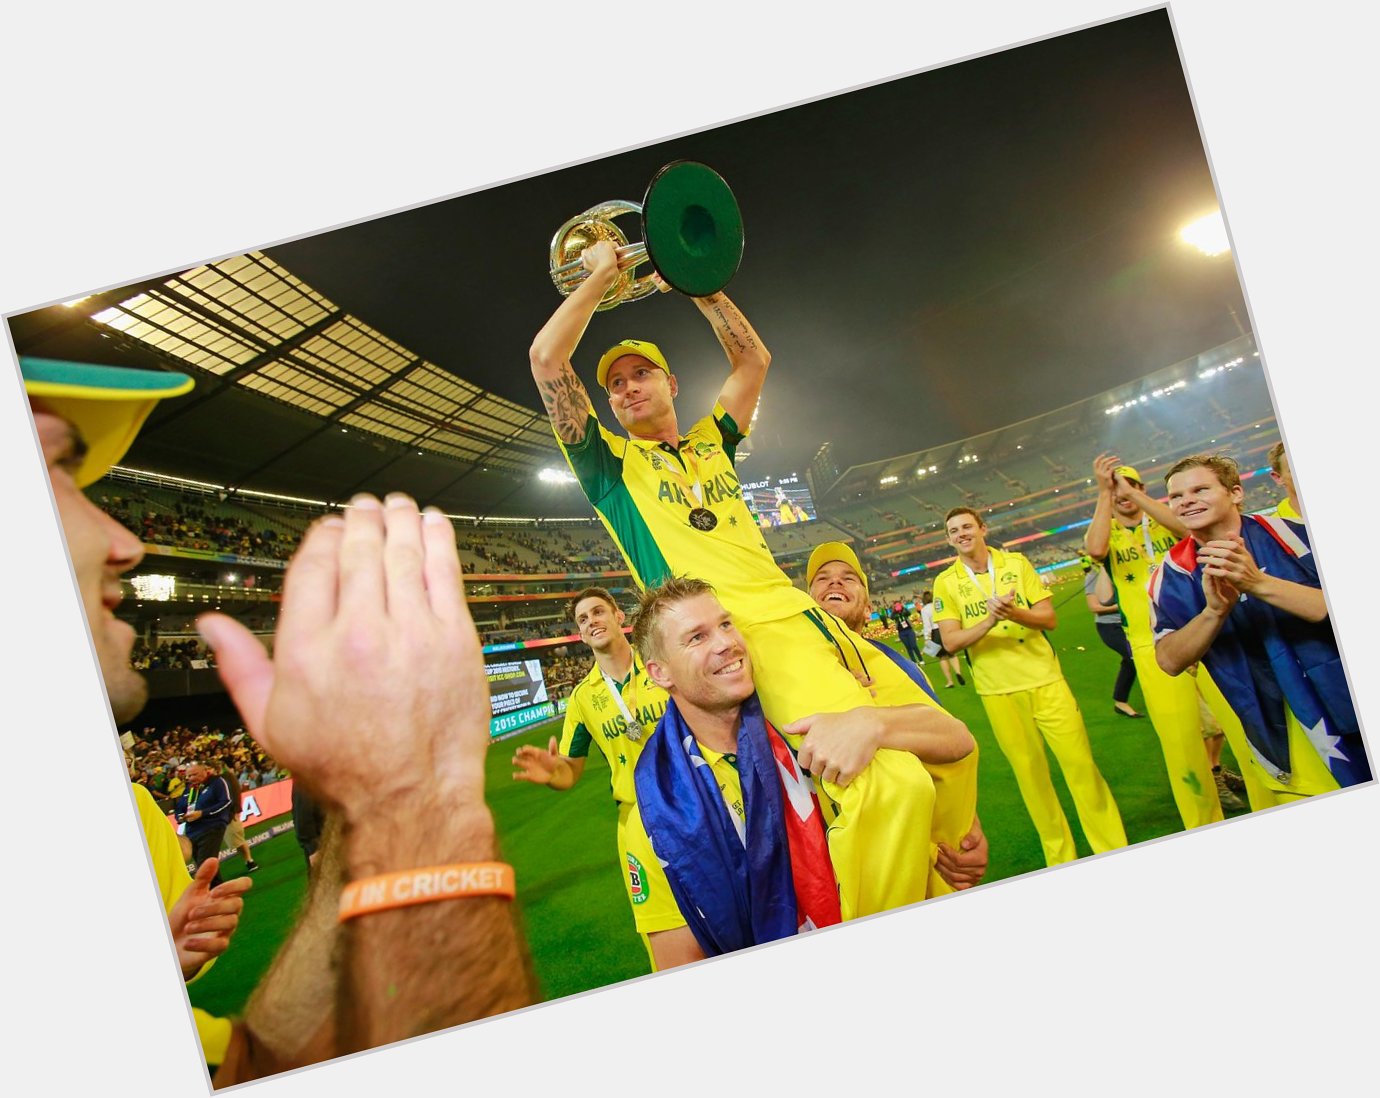 Michael Clarke has more to celebrate... Happy Birthday Was winning his defining moment? 